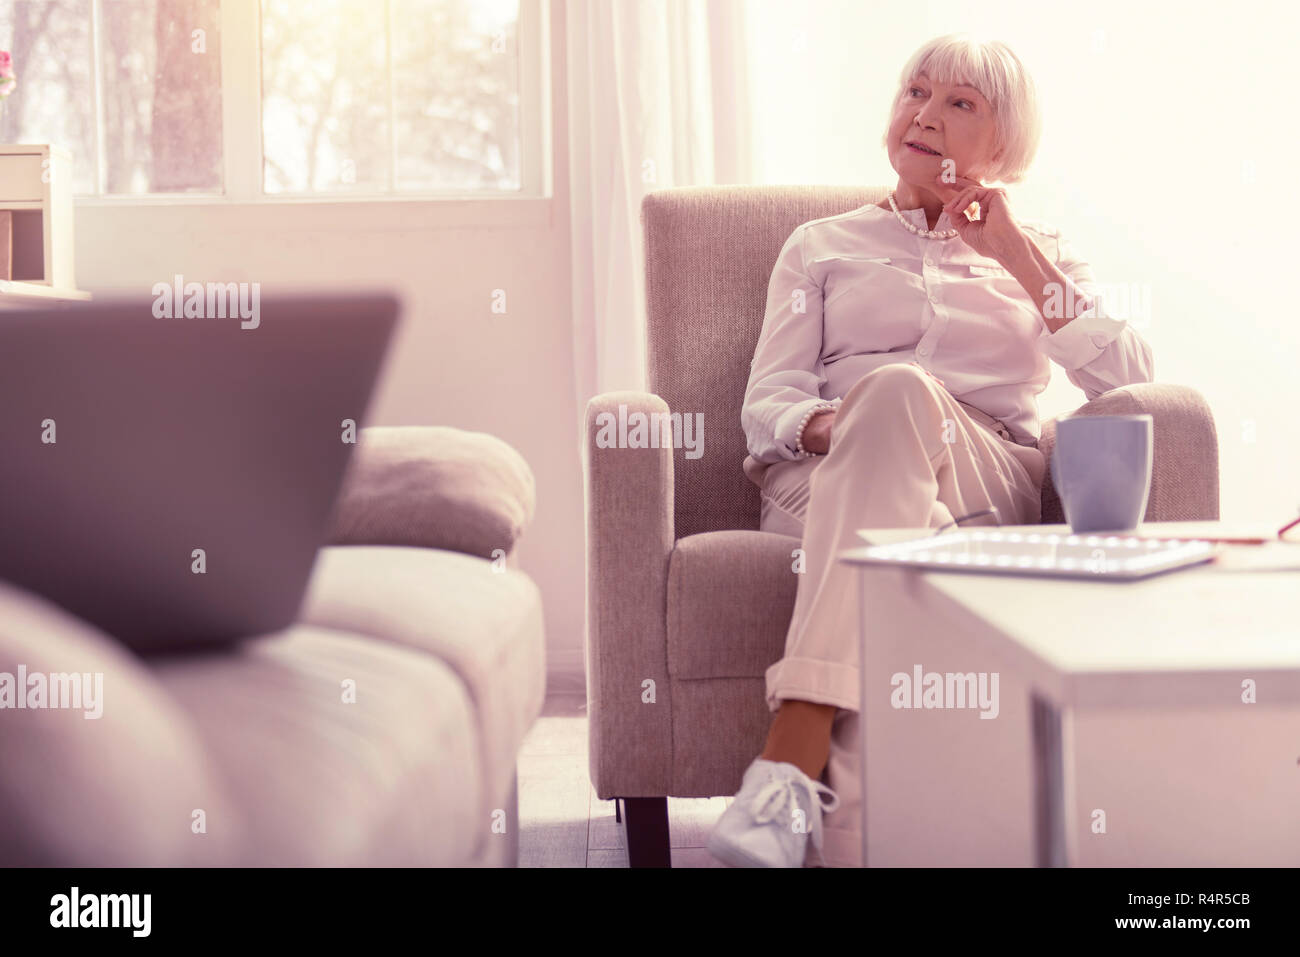 Meditative well-dressed senior lady chilling at home Stock Photo